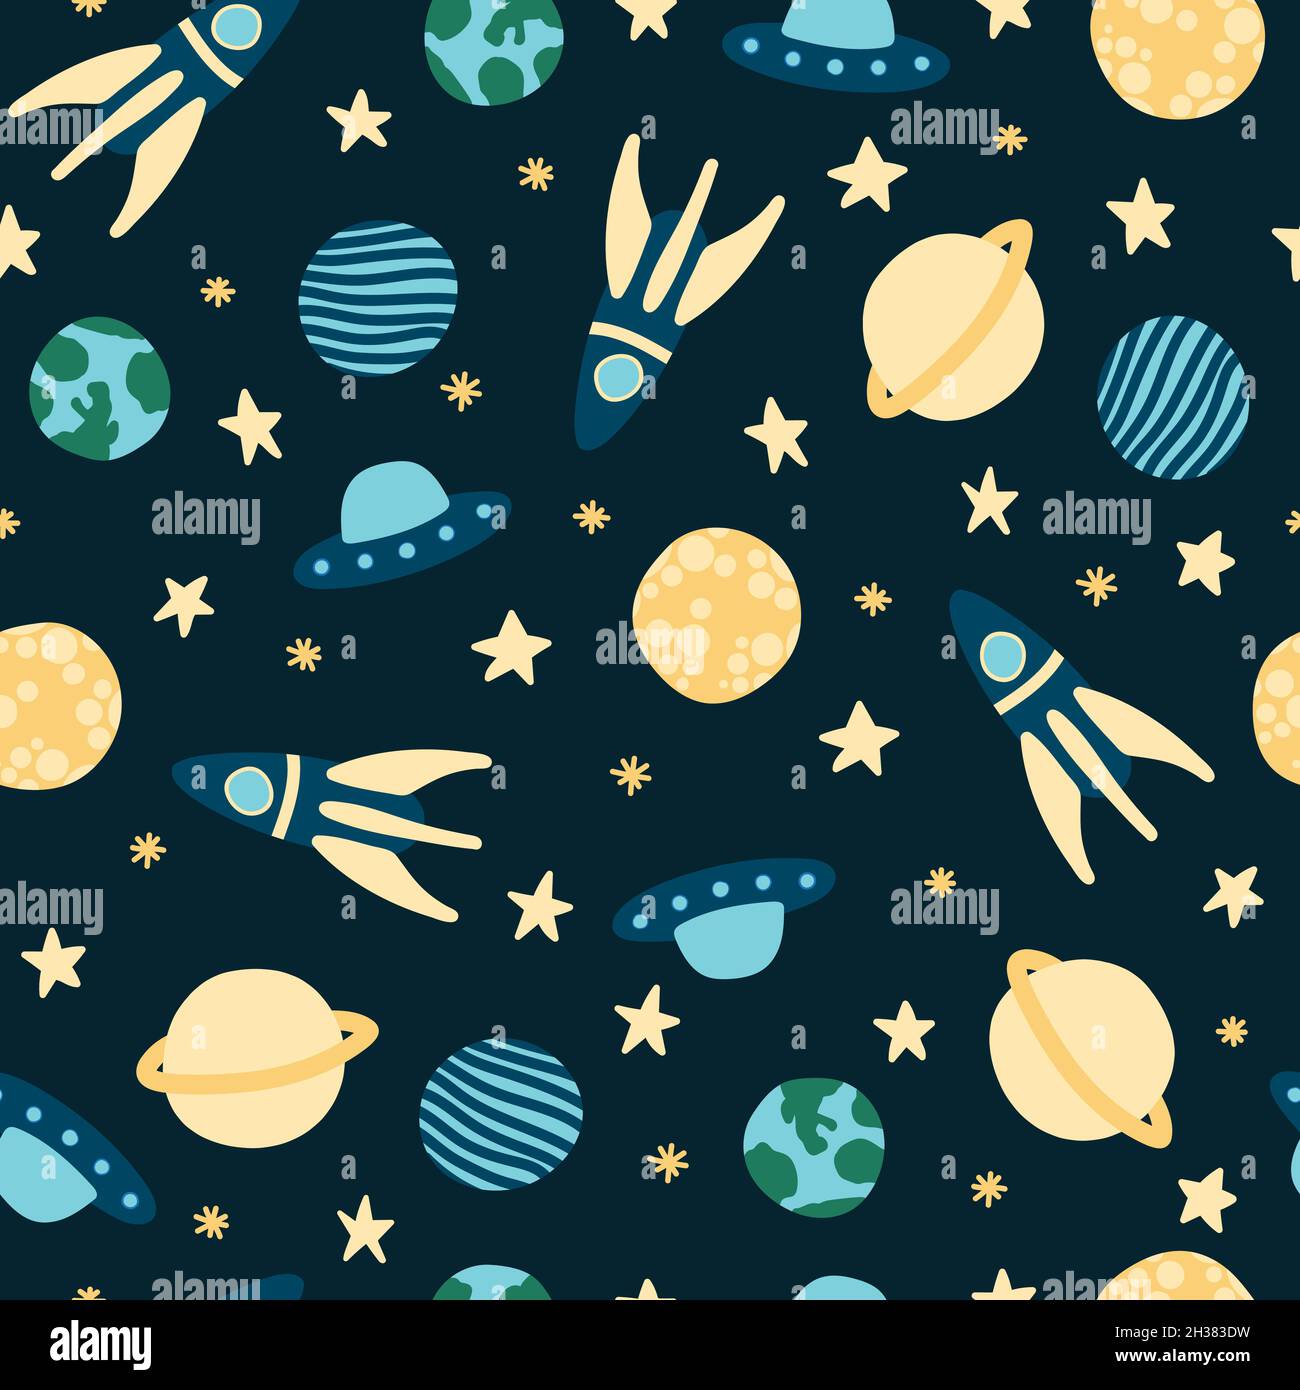 Seamless pattern vector design of space, with stars, rockets, spaceships and planets in the universe with a childish and doodle style with blue Stock Vector